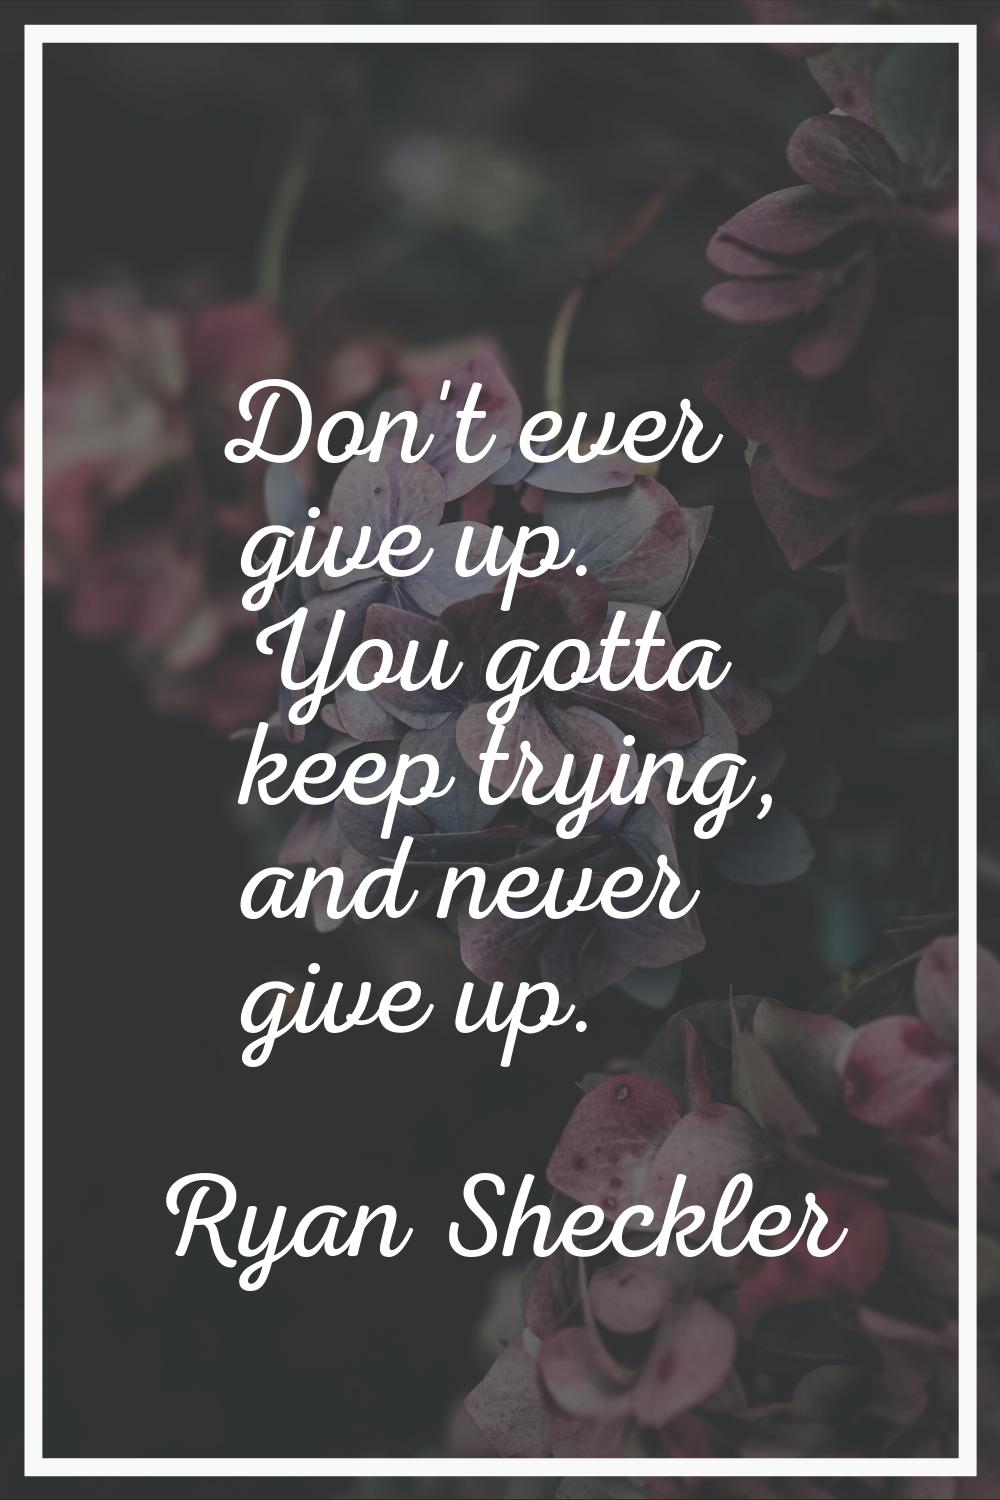 Don't ever give up. You gotta keep trying, and never give up.